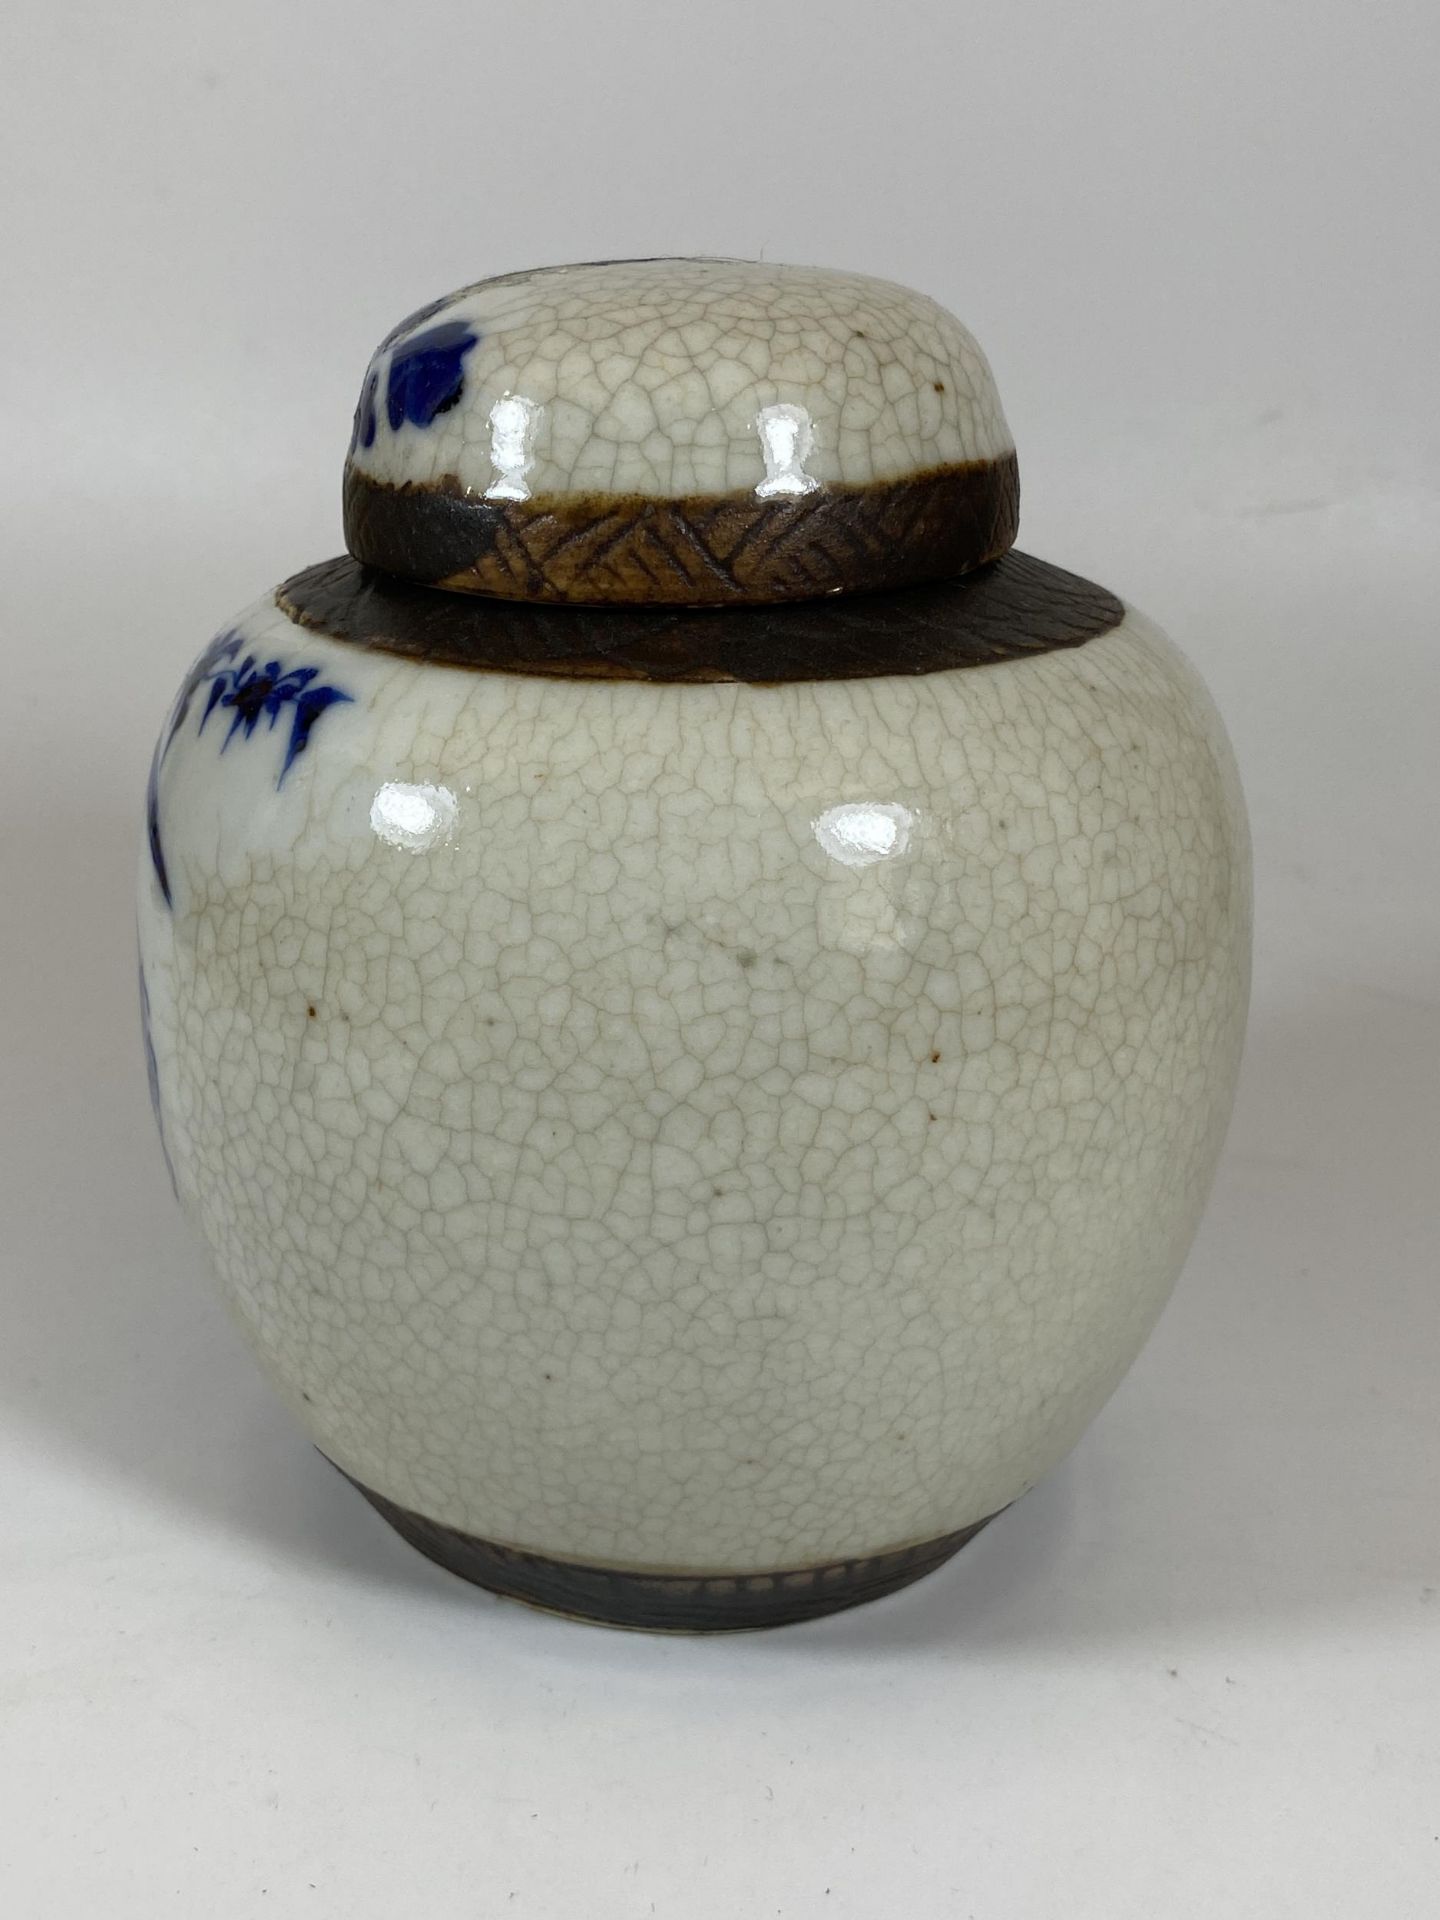 A LATE 19TH / EARLY 20TH CENTURY CHINESE BLUE AND WHITE CRACKLE GLAZE GINGER JAR, HEIGHT 15.5CM - Image 2 of 4